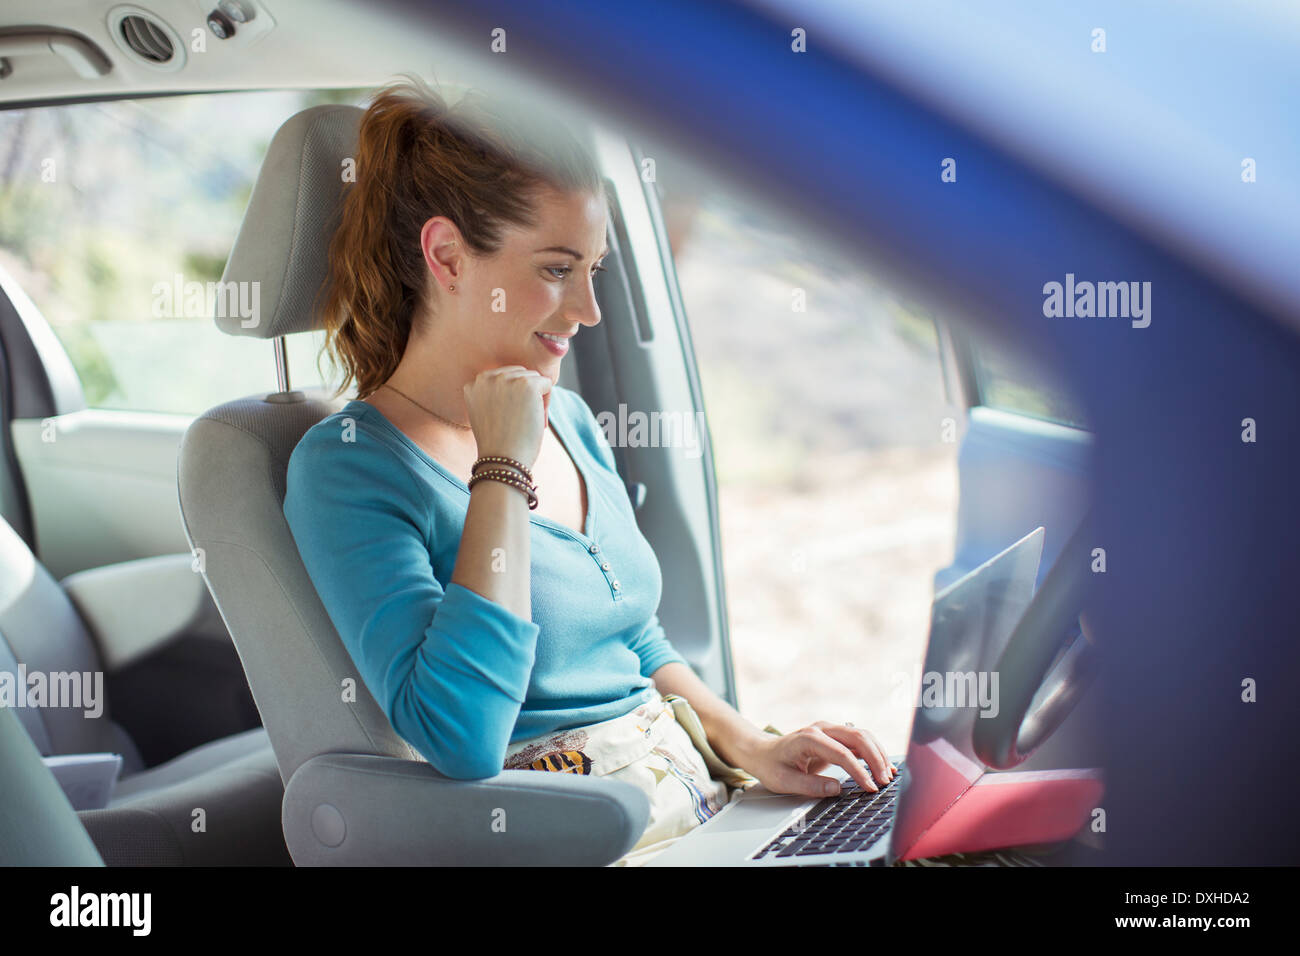 Woman using laptop in car Stock Photo